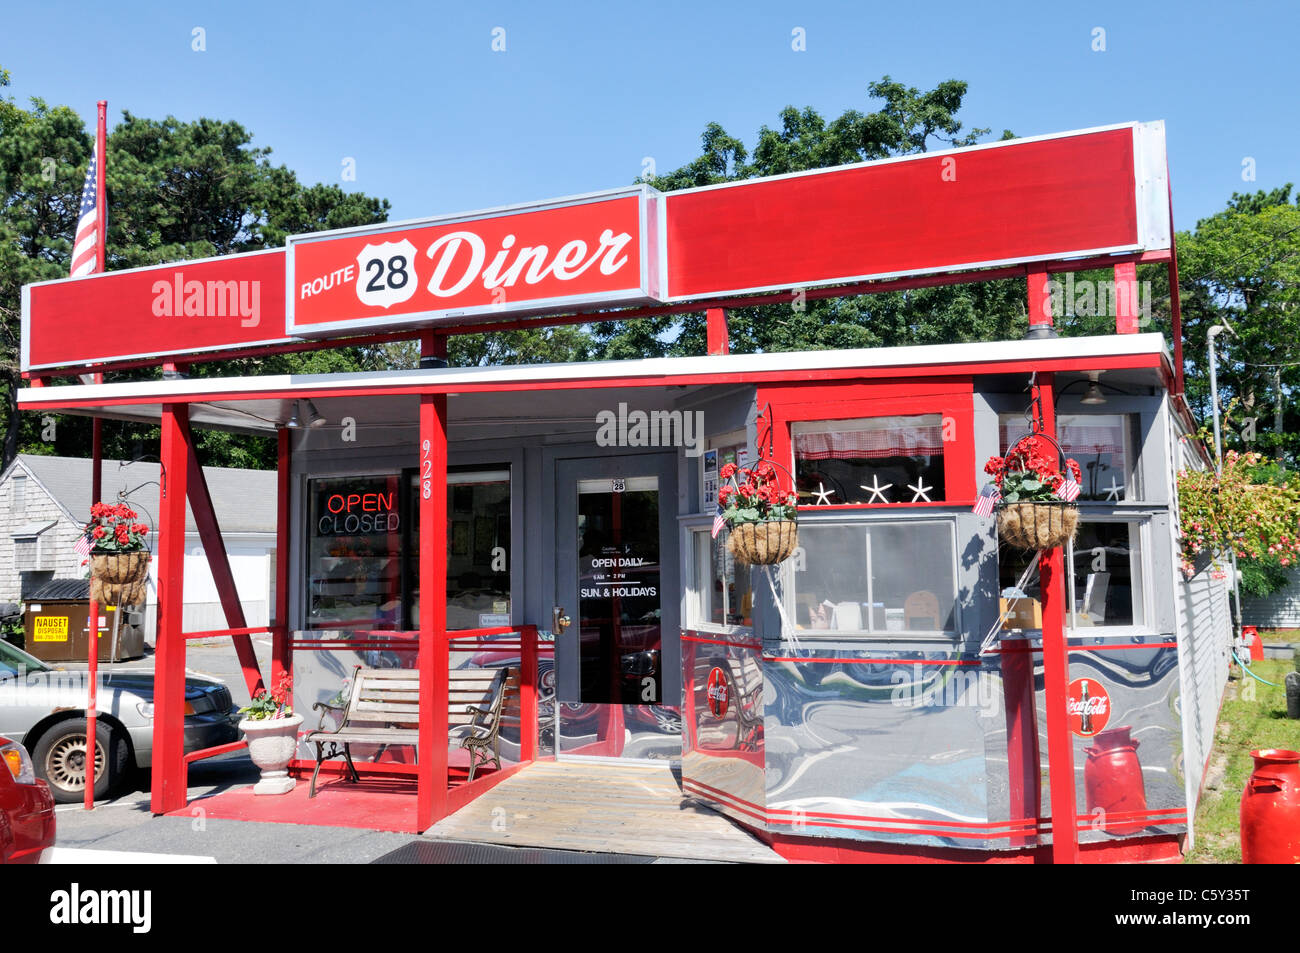 Exterior of an old fashioned diner in summer on Route 28 in Yarmouth, Cape Cod, Massachusetts on a sunny blue sky clear day, USA. Stock Photo